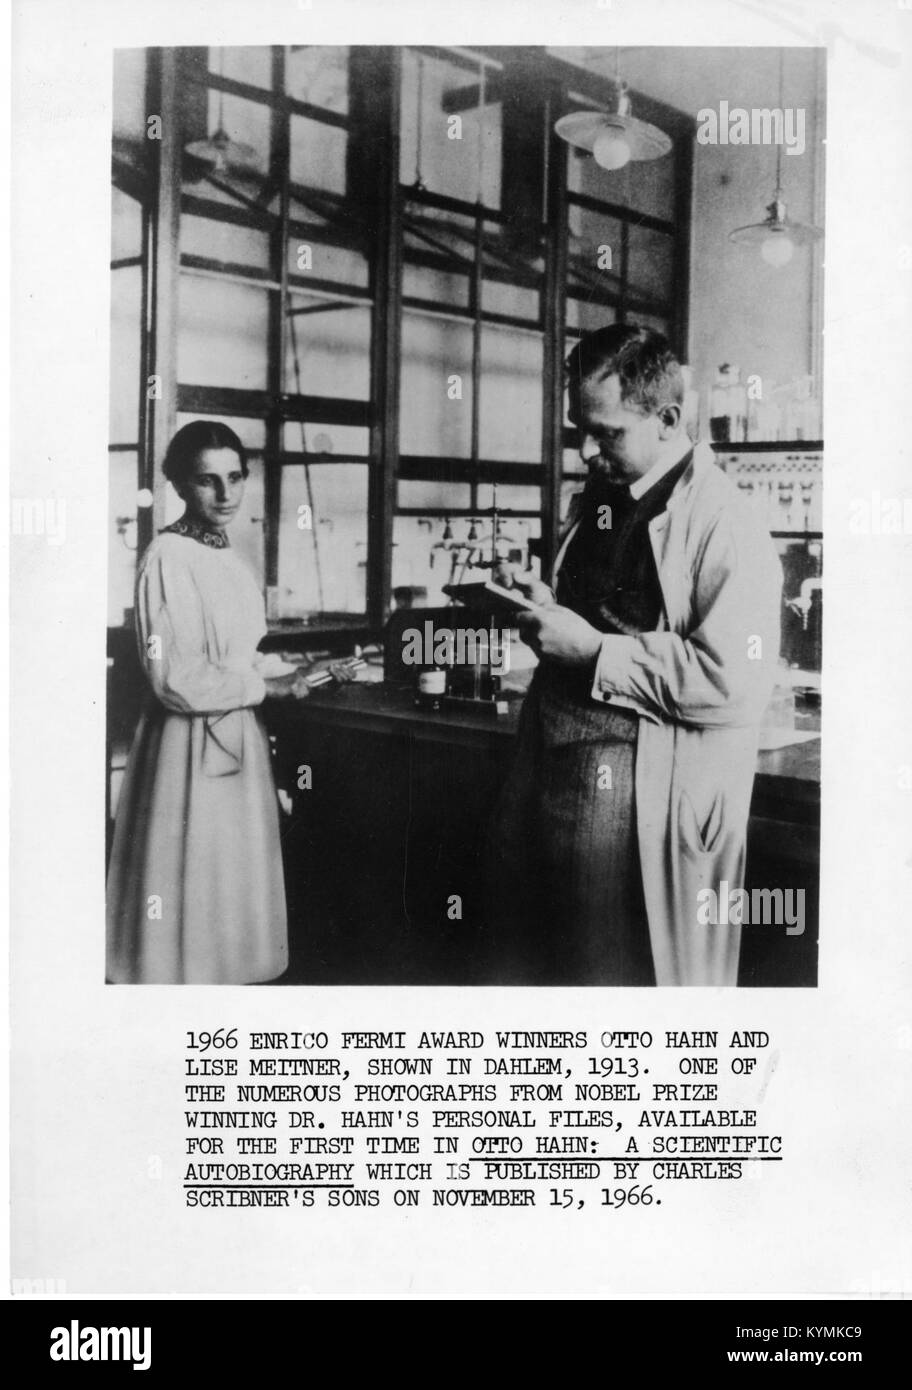 Lise Meitner (1878-1968) and Otto Hahn (1879-1968), Dahlem, Germany, 1913 4405627945 o Stock Photo